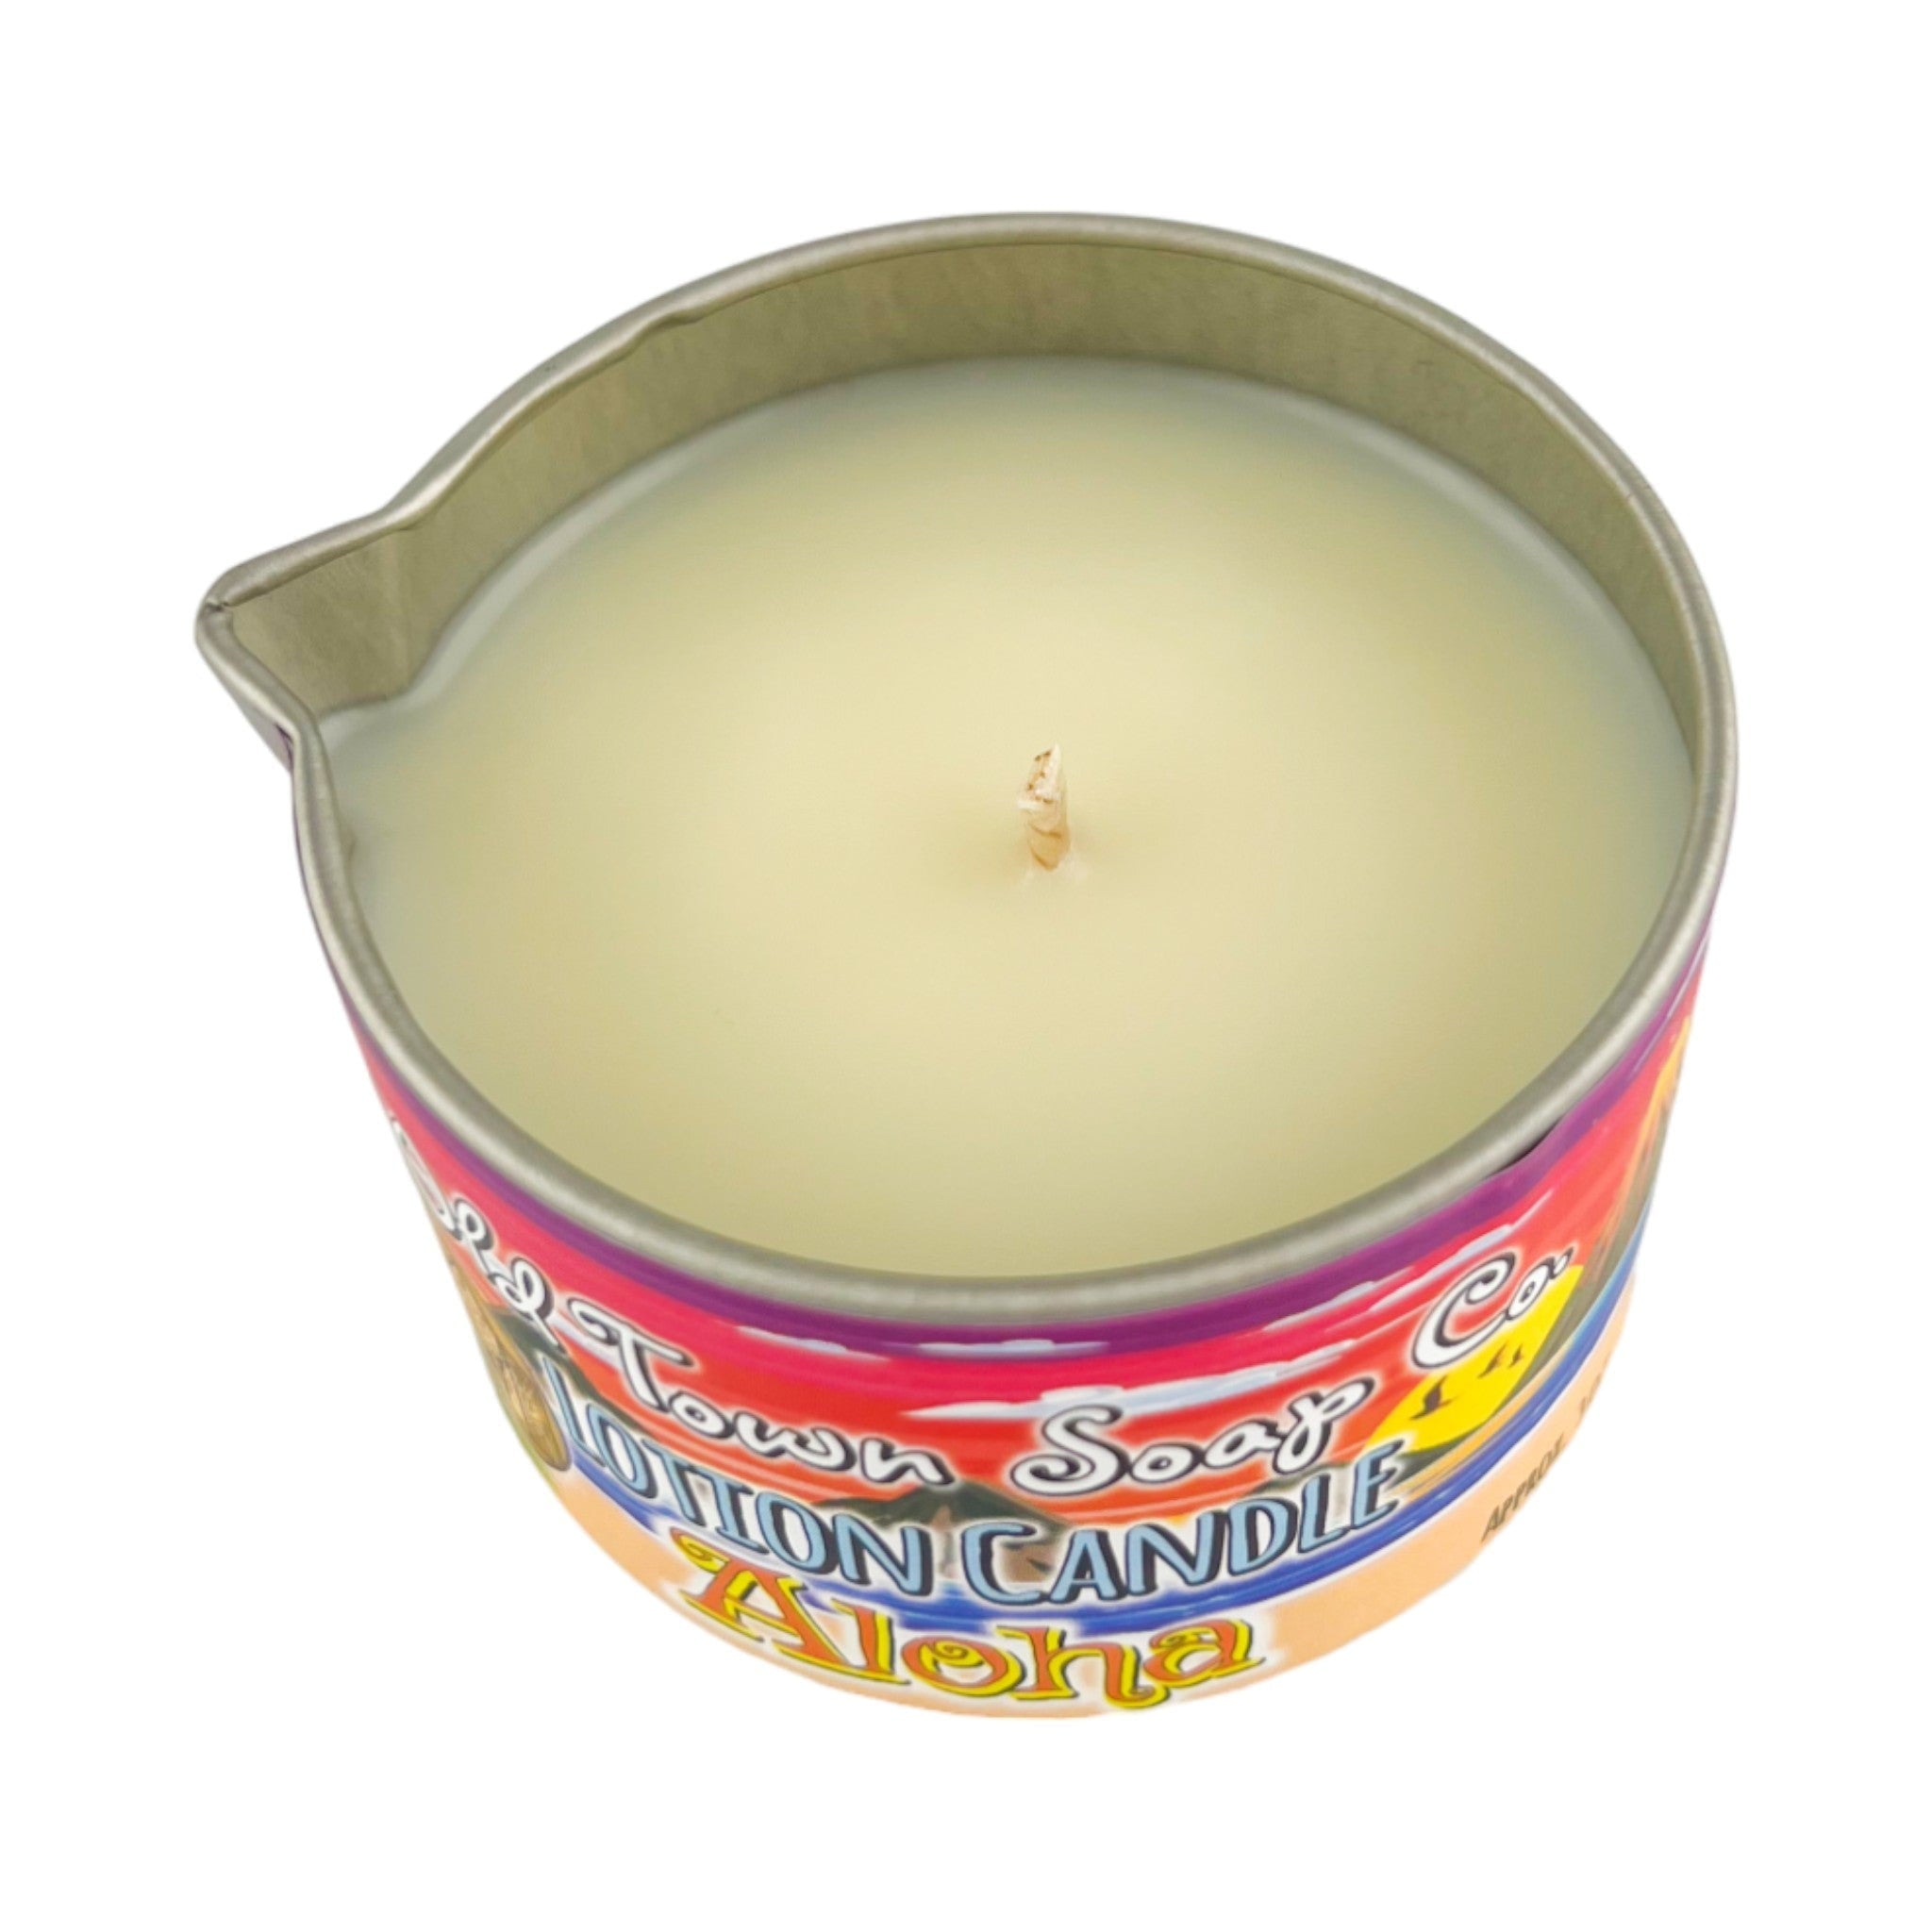 Aloha -Lotion Candle - Old Town Soap Co.